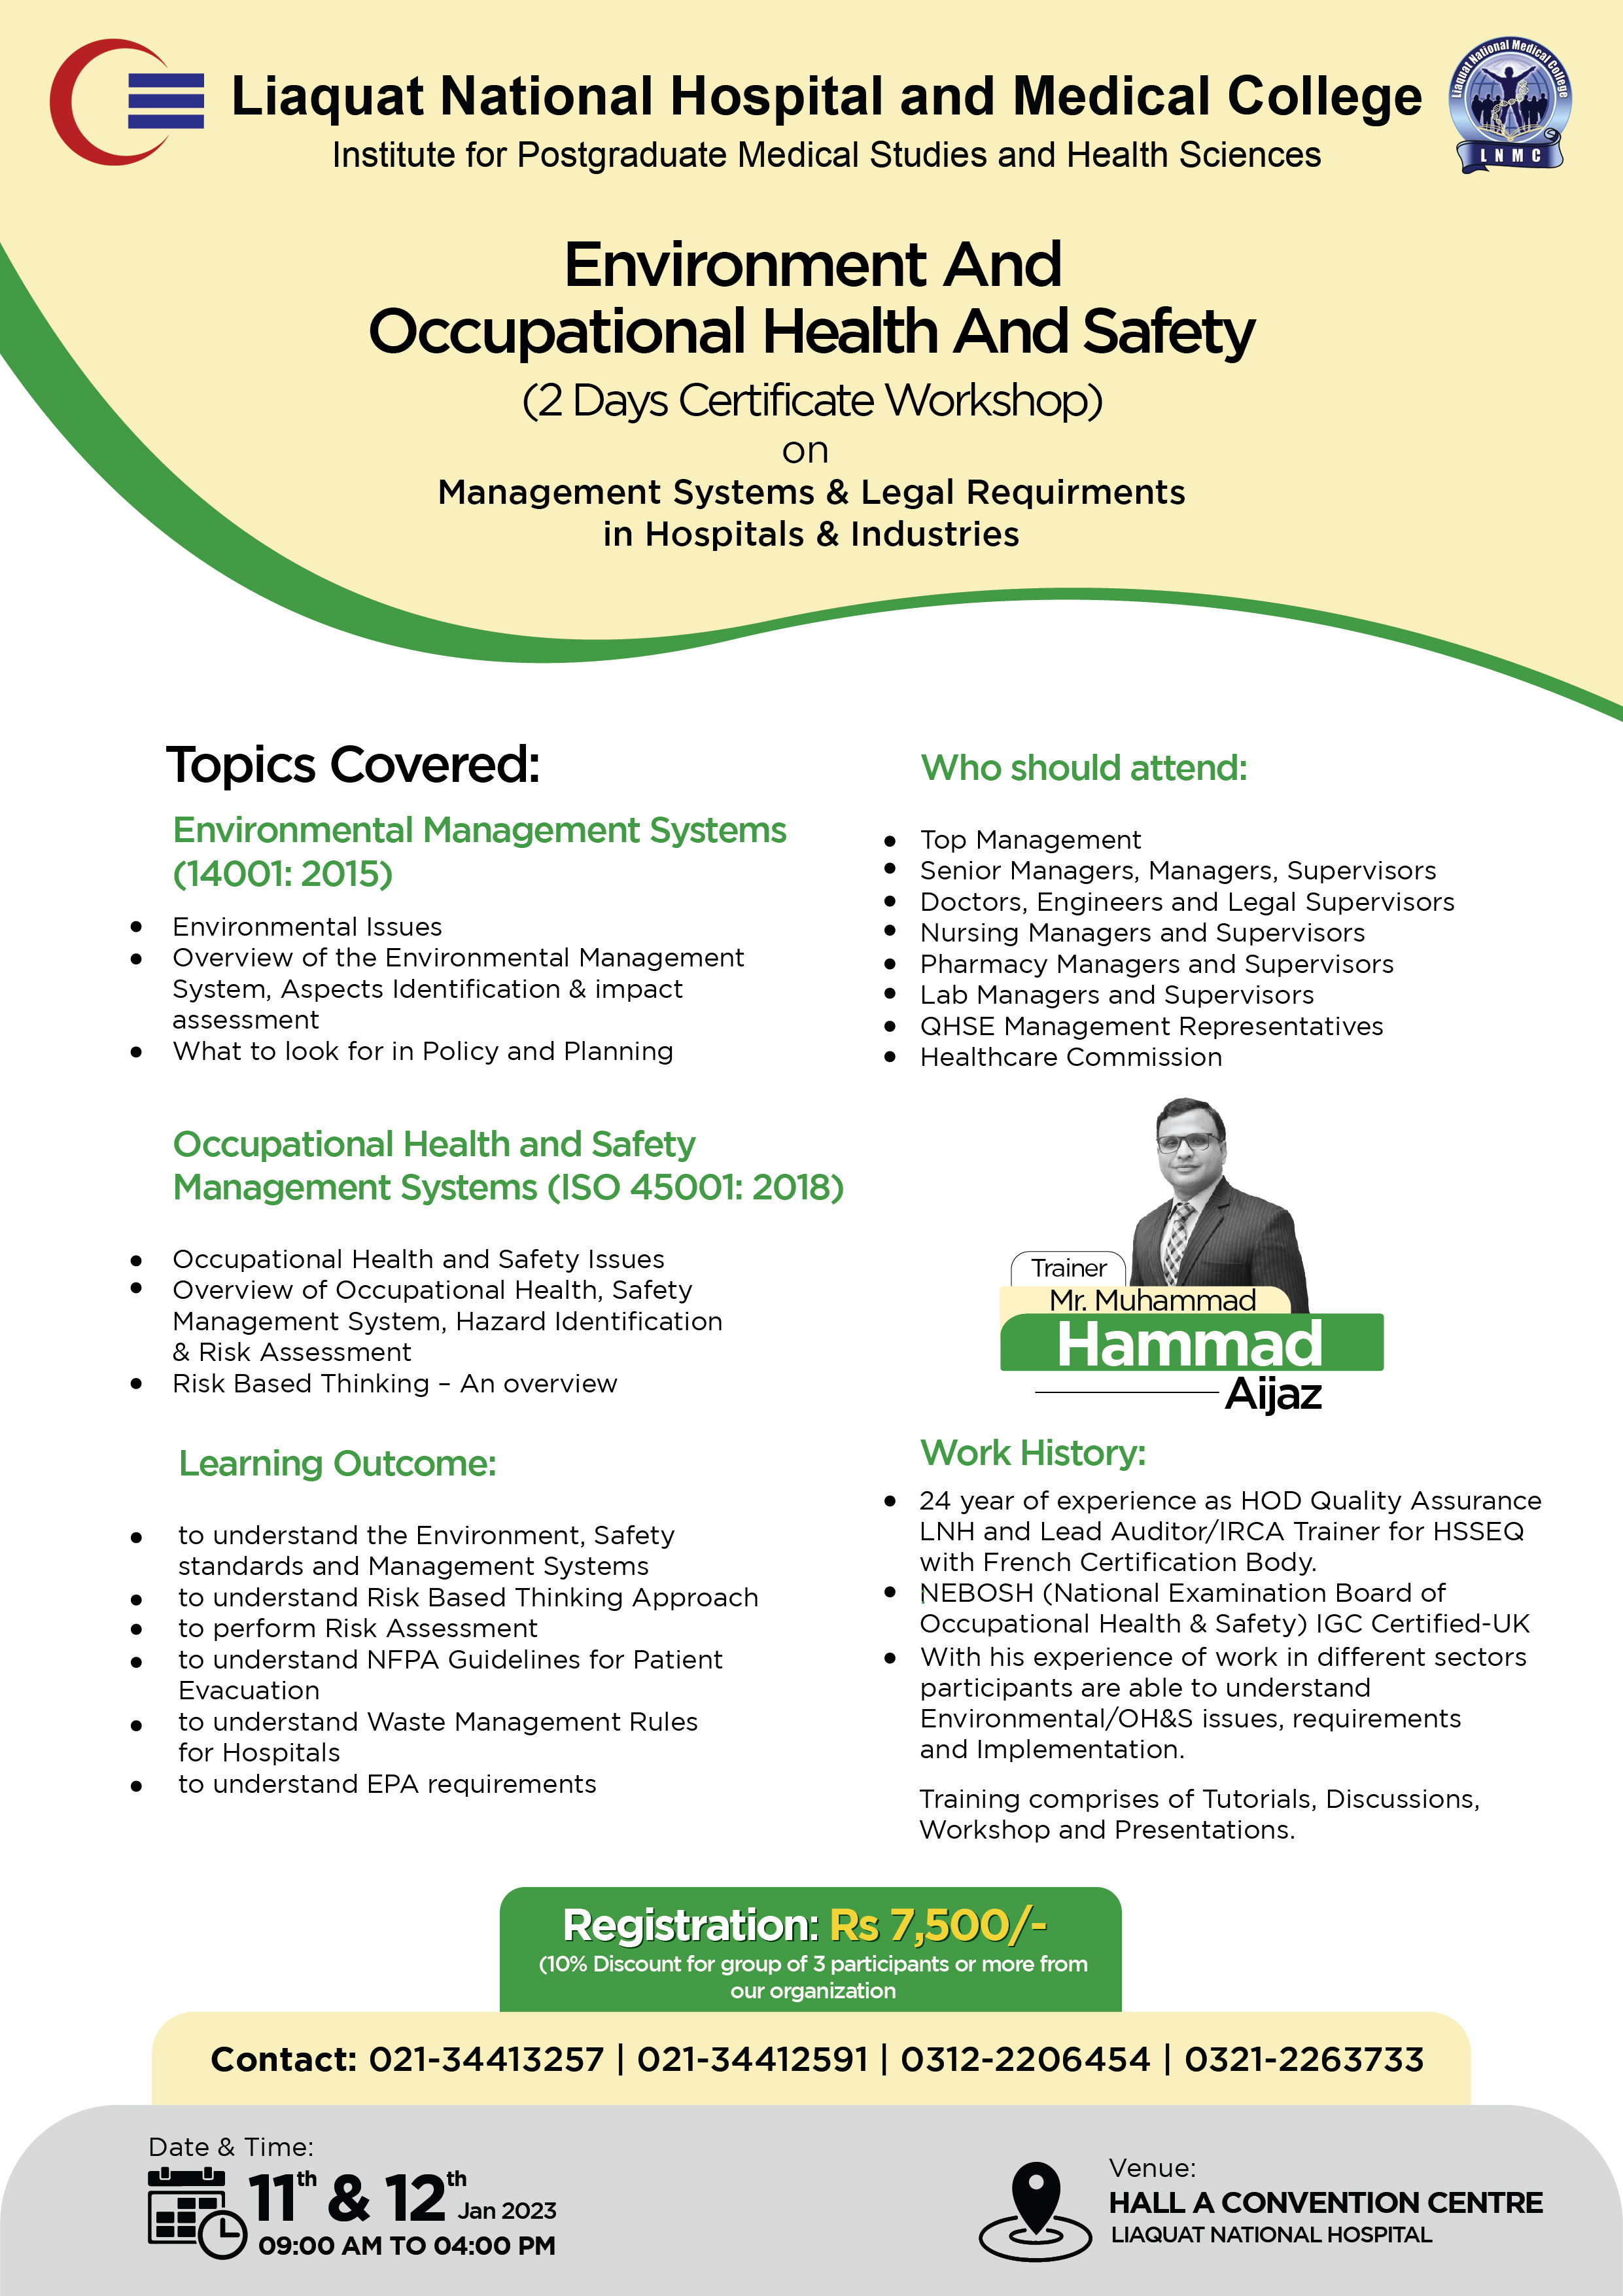 2 Days Certificate Workshop on Management Systems and Legal Requirements in Hospital and Industries